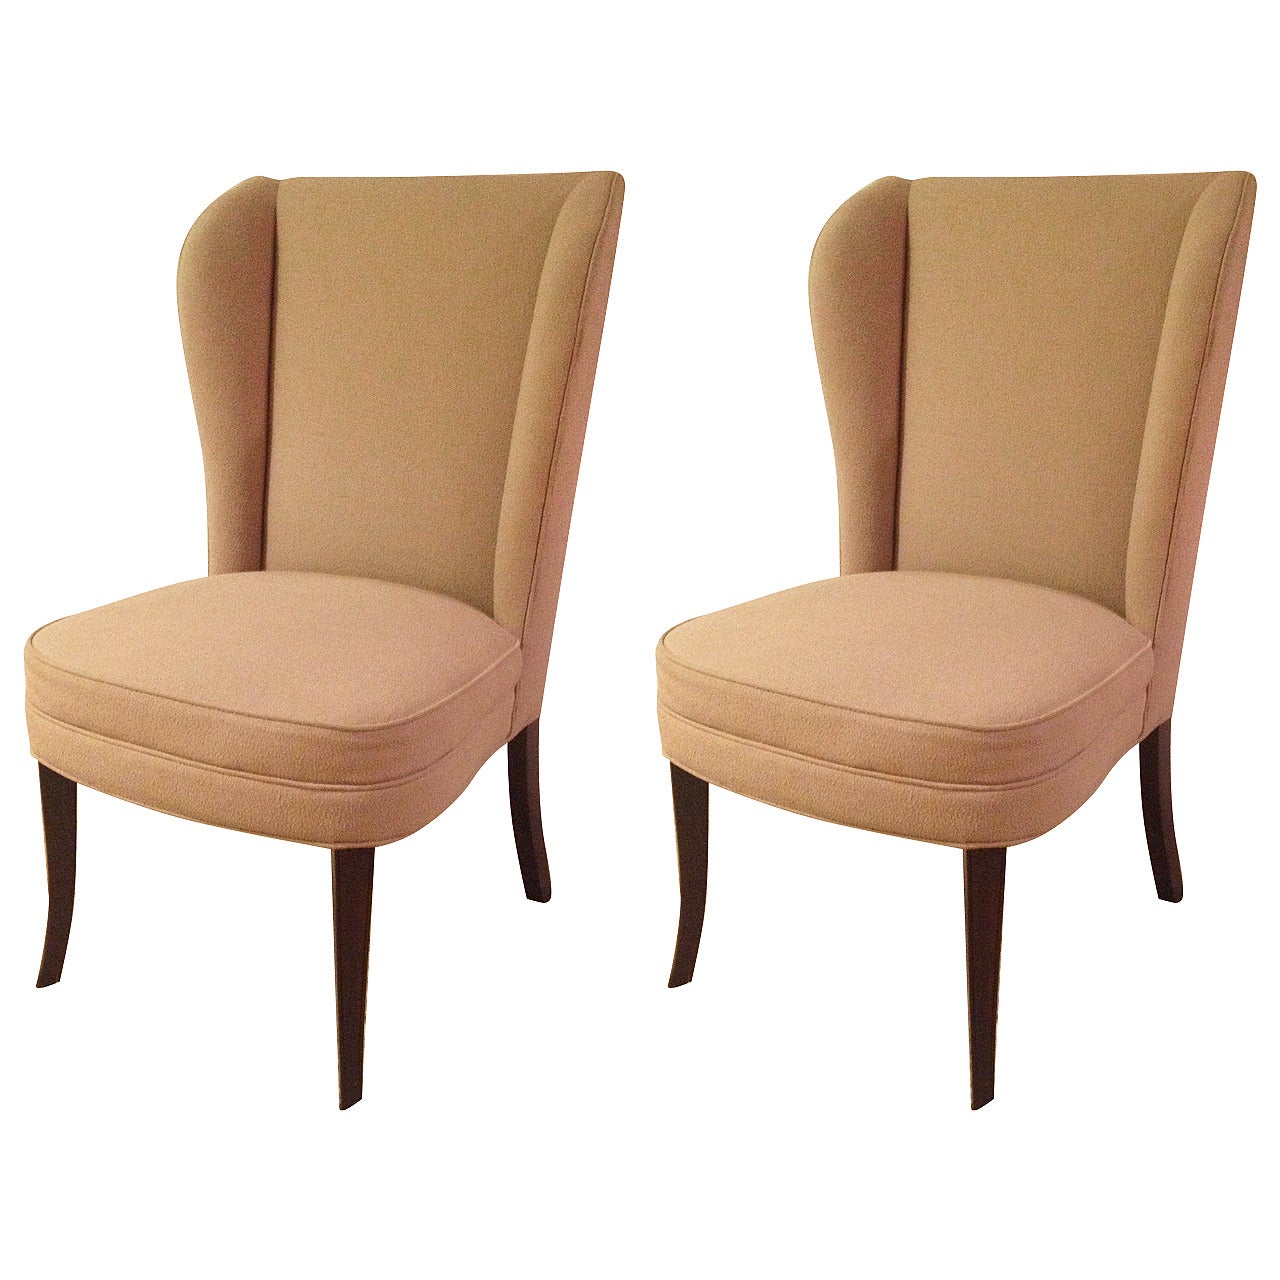 Pair of Tommi Parzinger Style Chairs